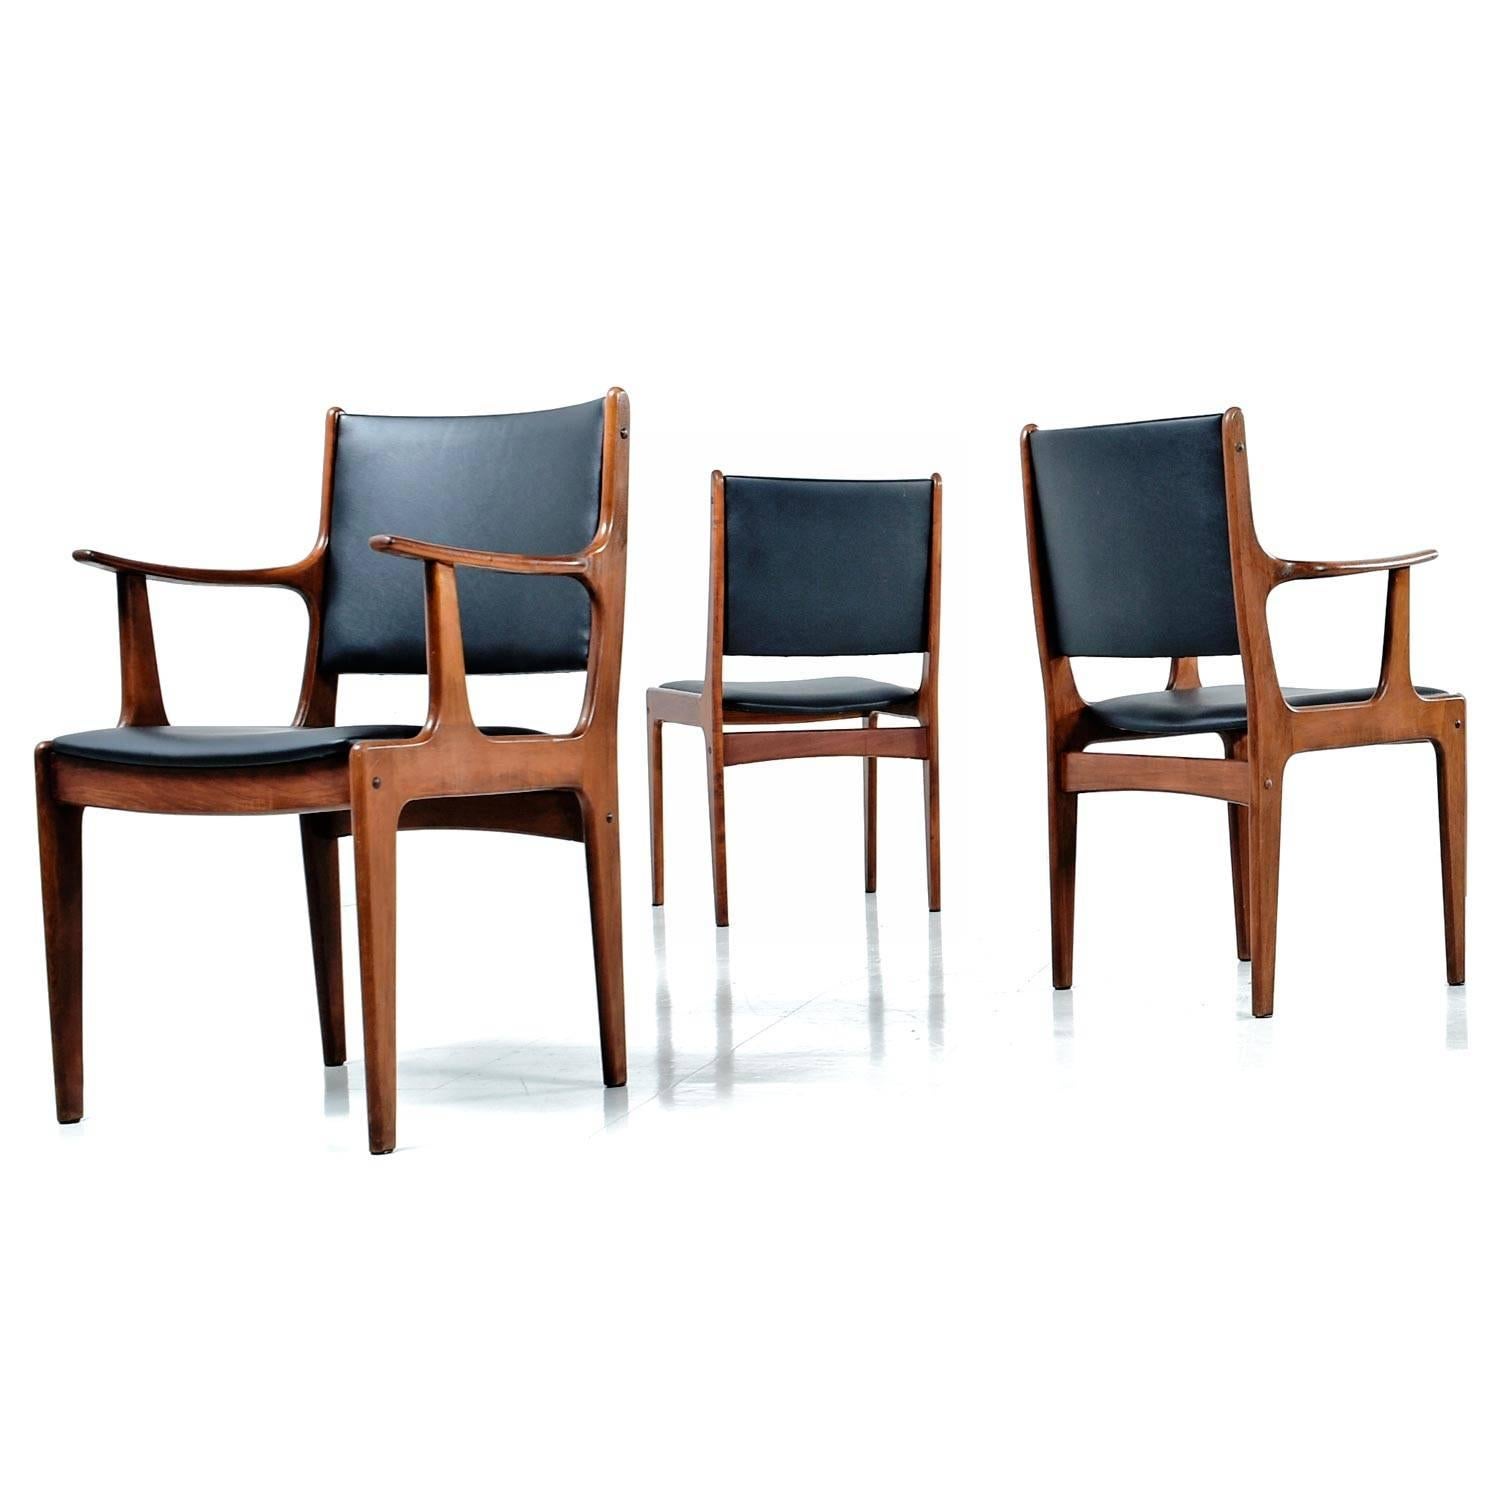 Set of six solid teak vintage Danish modern dining chairs made in Singapore. The seats have been updated with new high quality black vinyl upholstery. The stout construction suits today's needs, enhancing comfort without sacrificing styles.